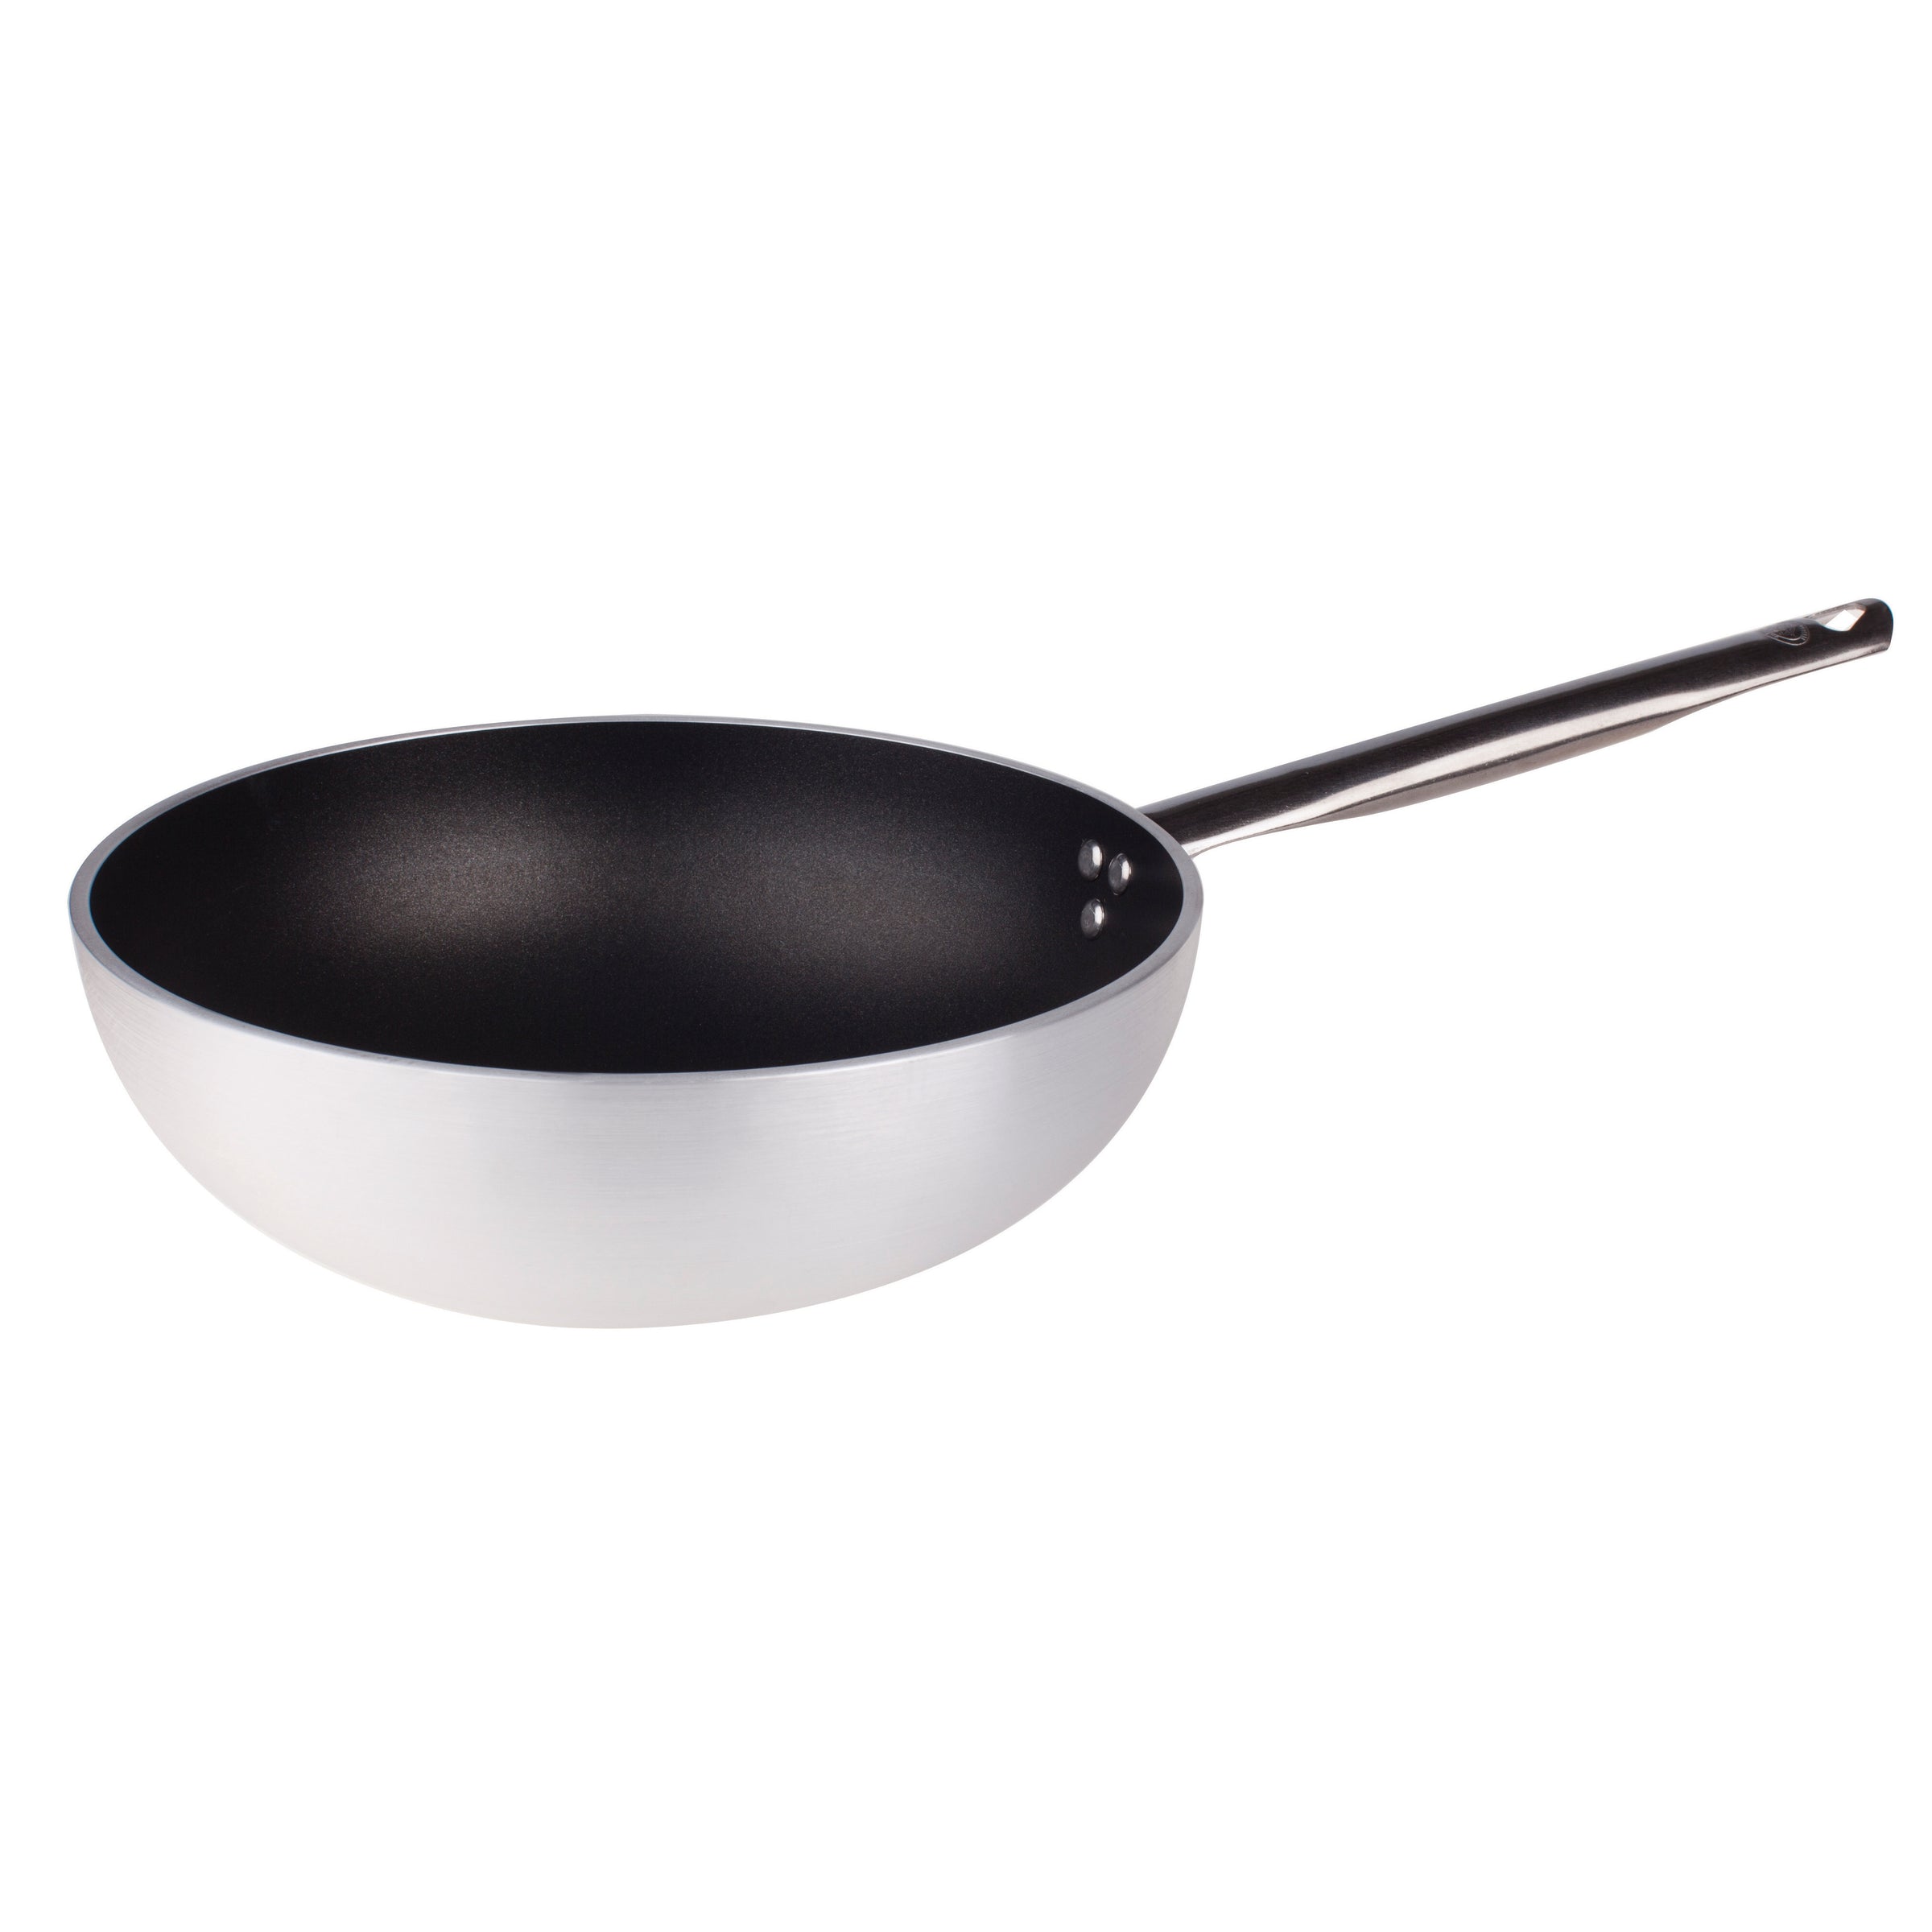 Agnelli Aluminum 5mm Nonstick Wok with Flat Bottom & Stainless Steel Handle, 11-Inches